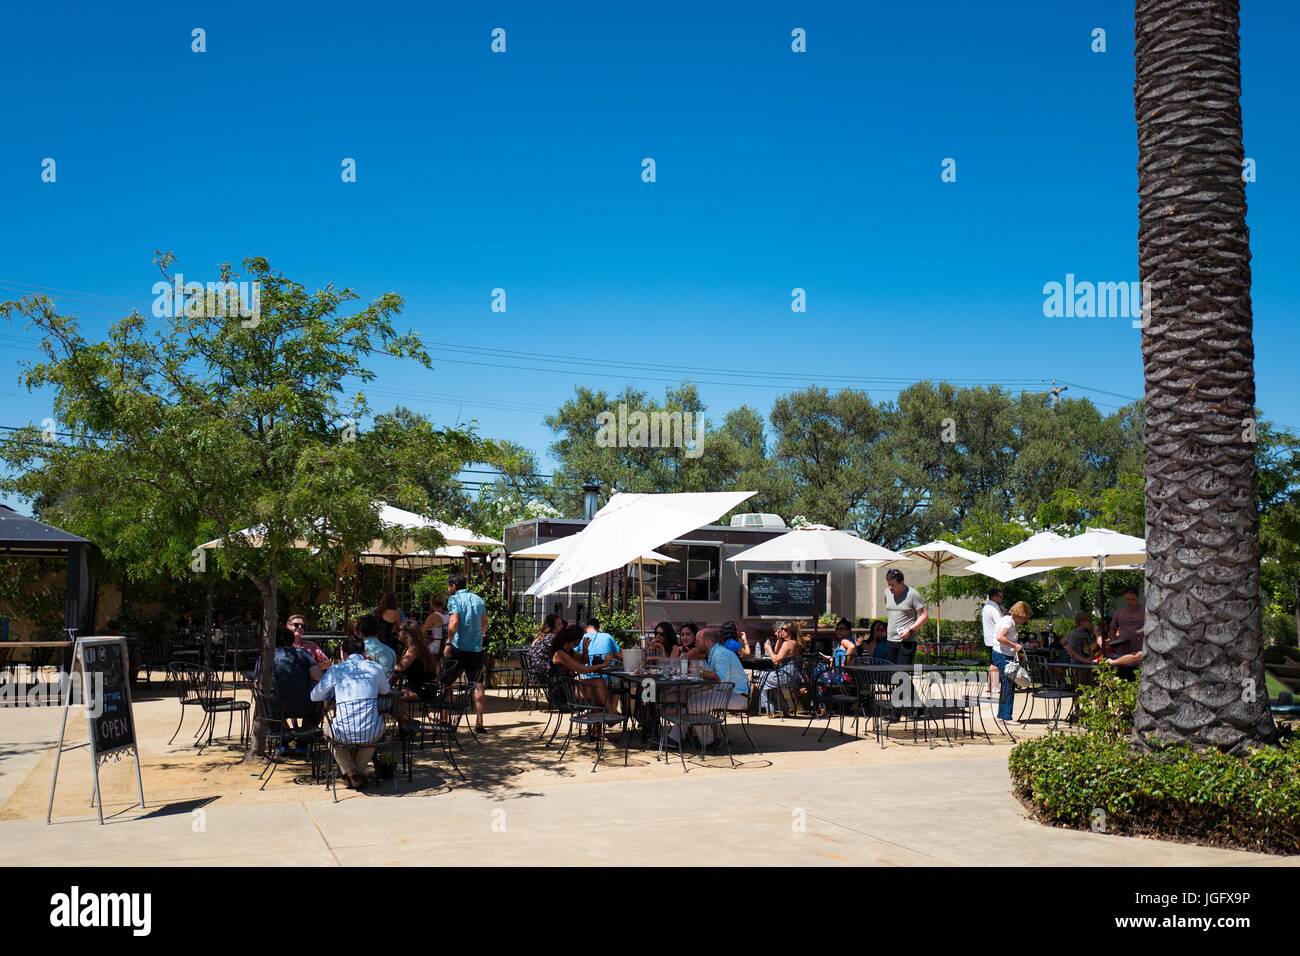 Visitors dine outdoors and taste wines at Wente winery in Livermore Wine Country, Livermore, California, June 25, 2017. Founded in 1883, Wente is the United States' oldest continuously operating family owned vineyard. Stock Photo